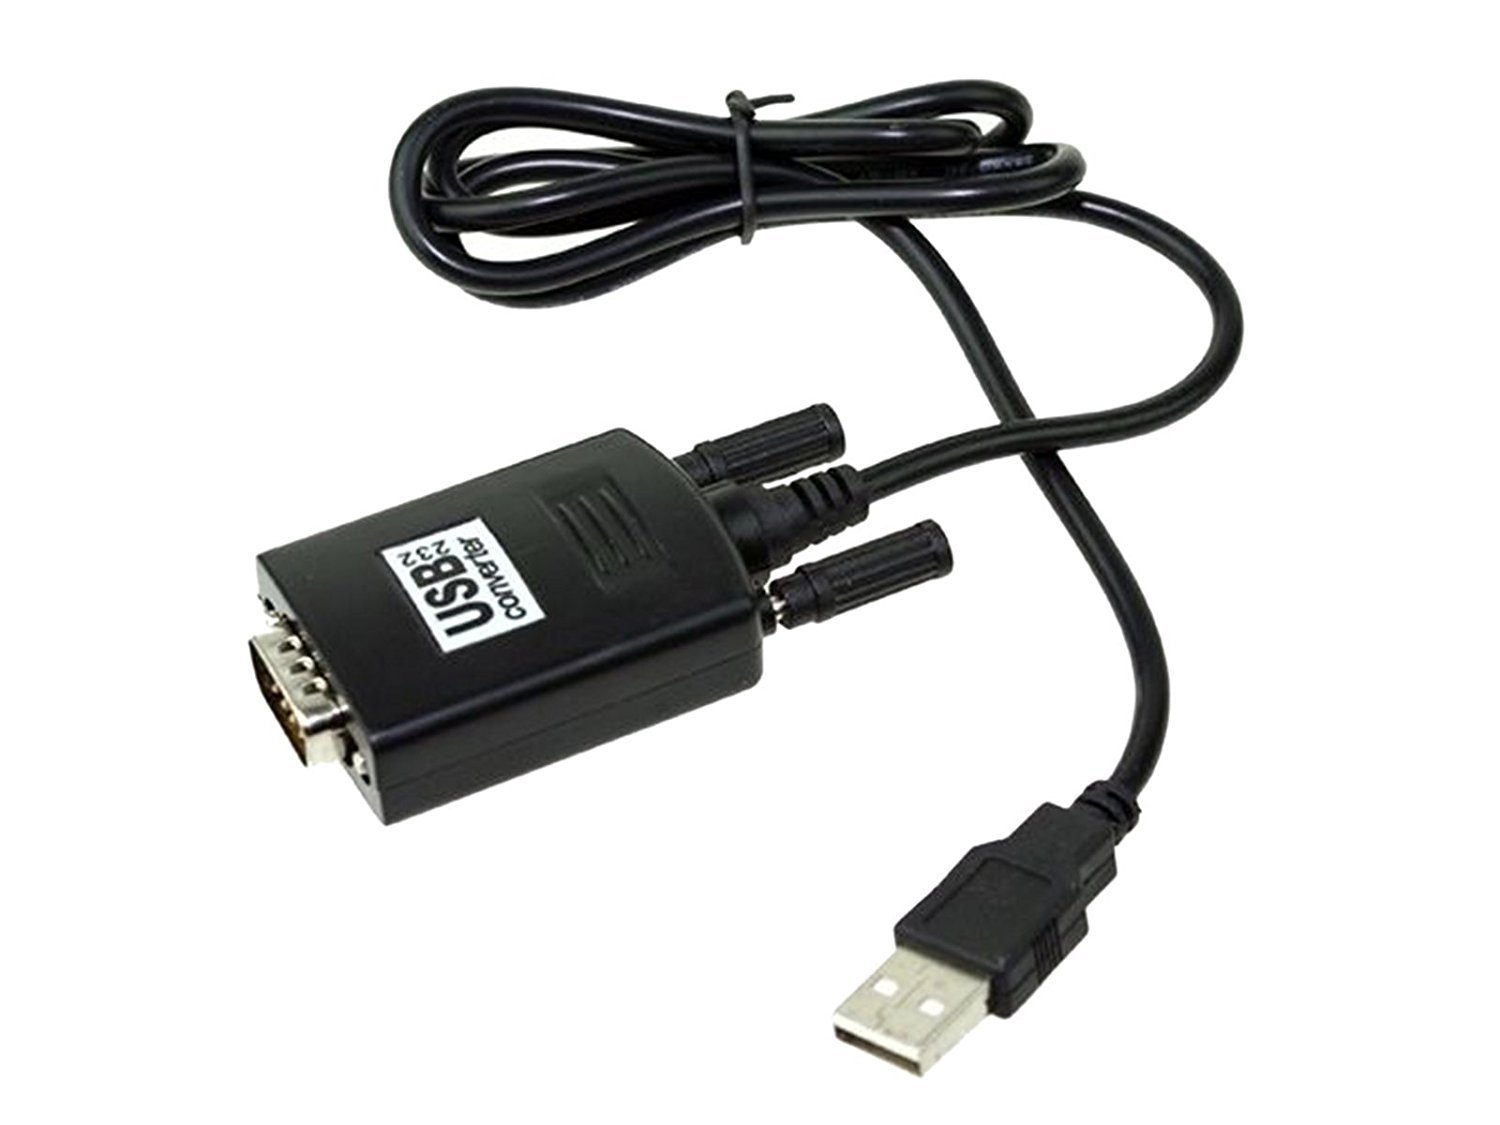 USB TO RS-232 SERIAL CABLE ADAPTER (Y105) (BLACK)